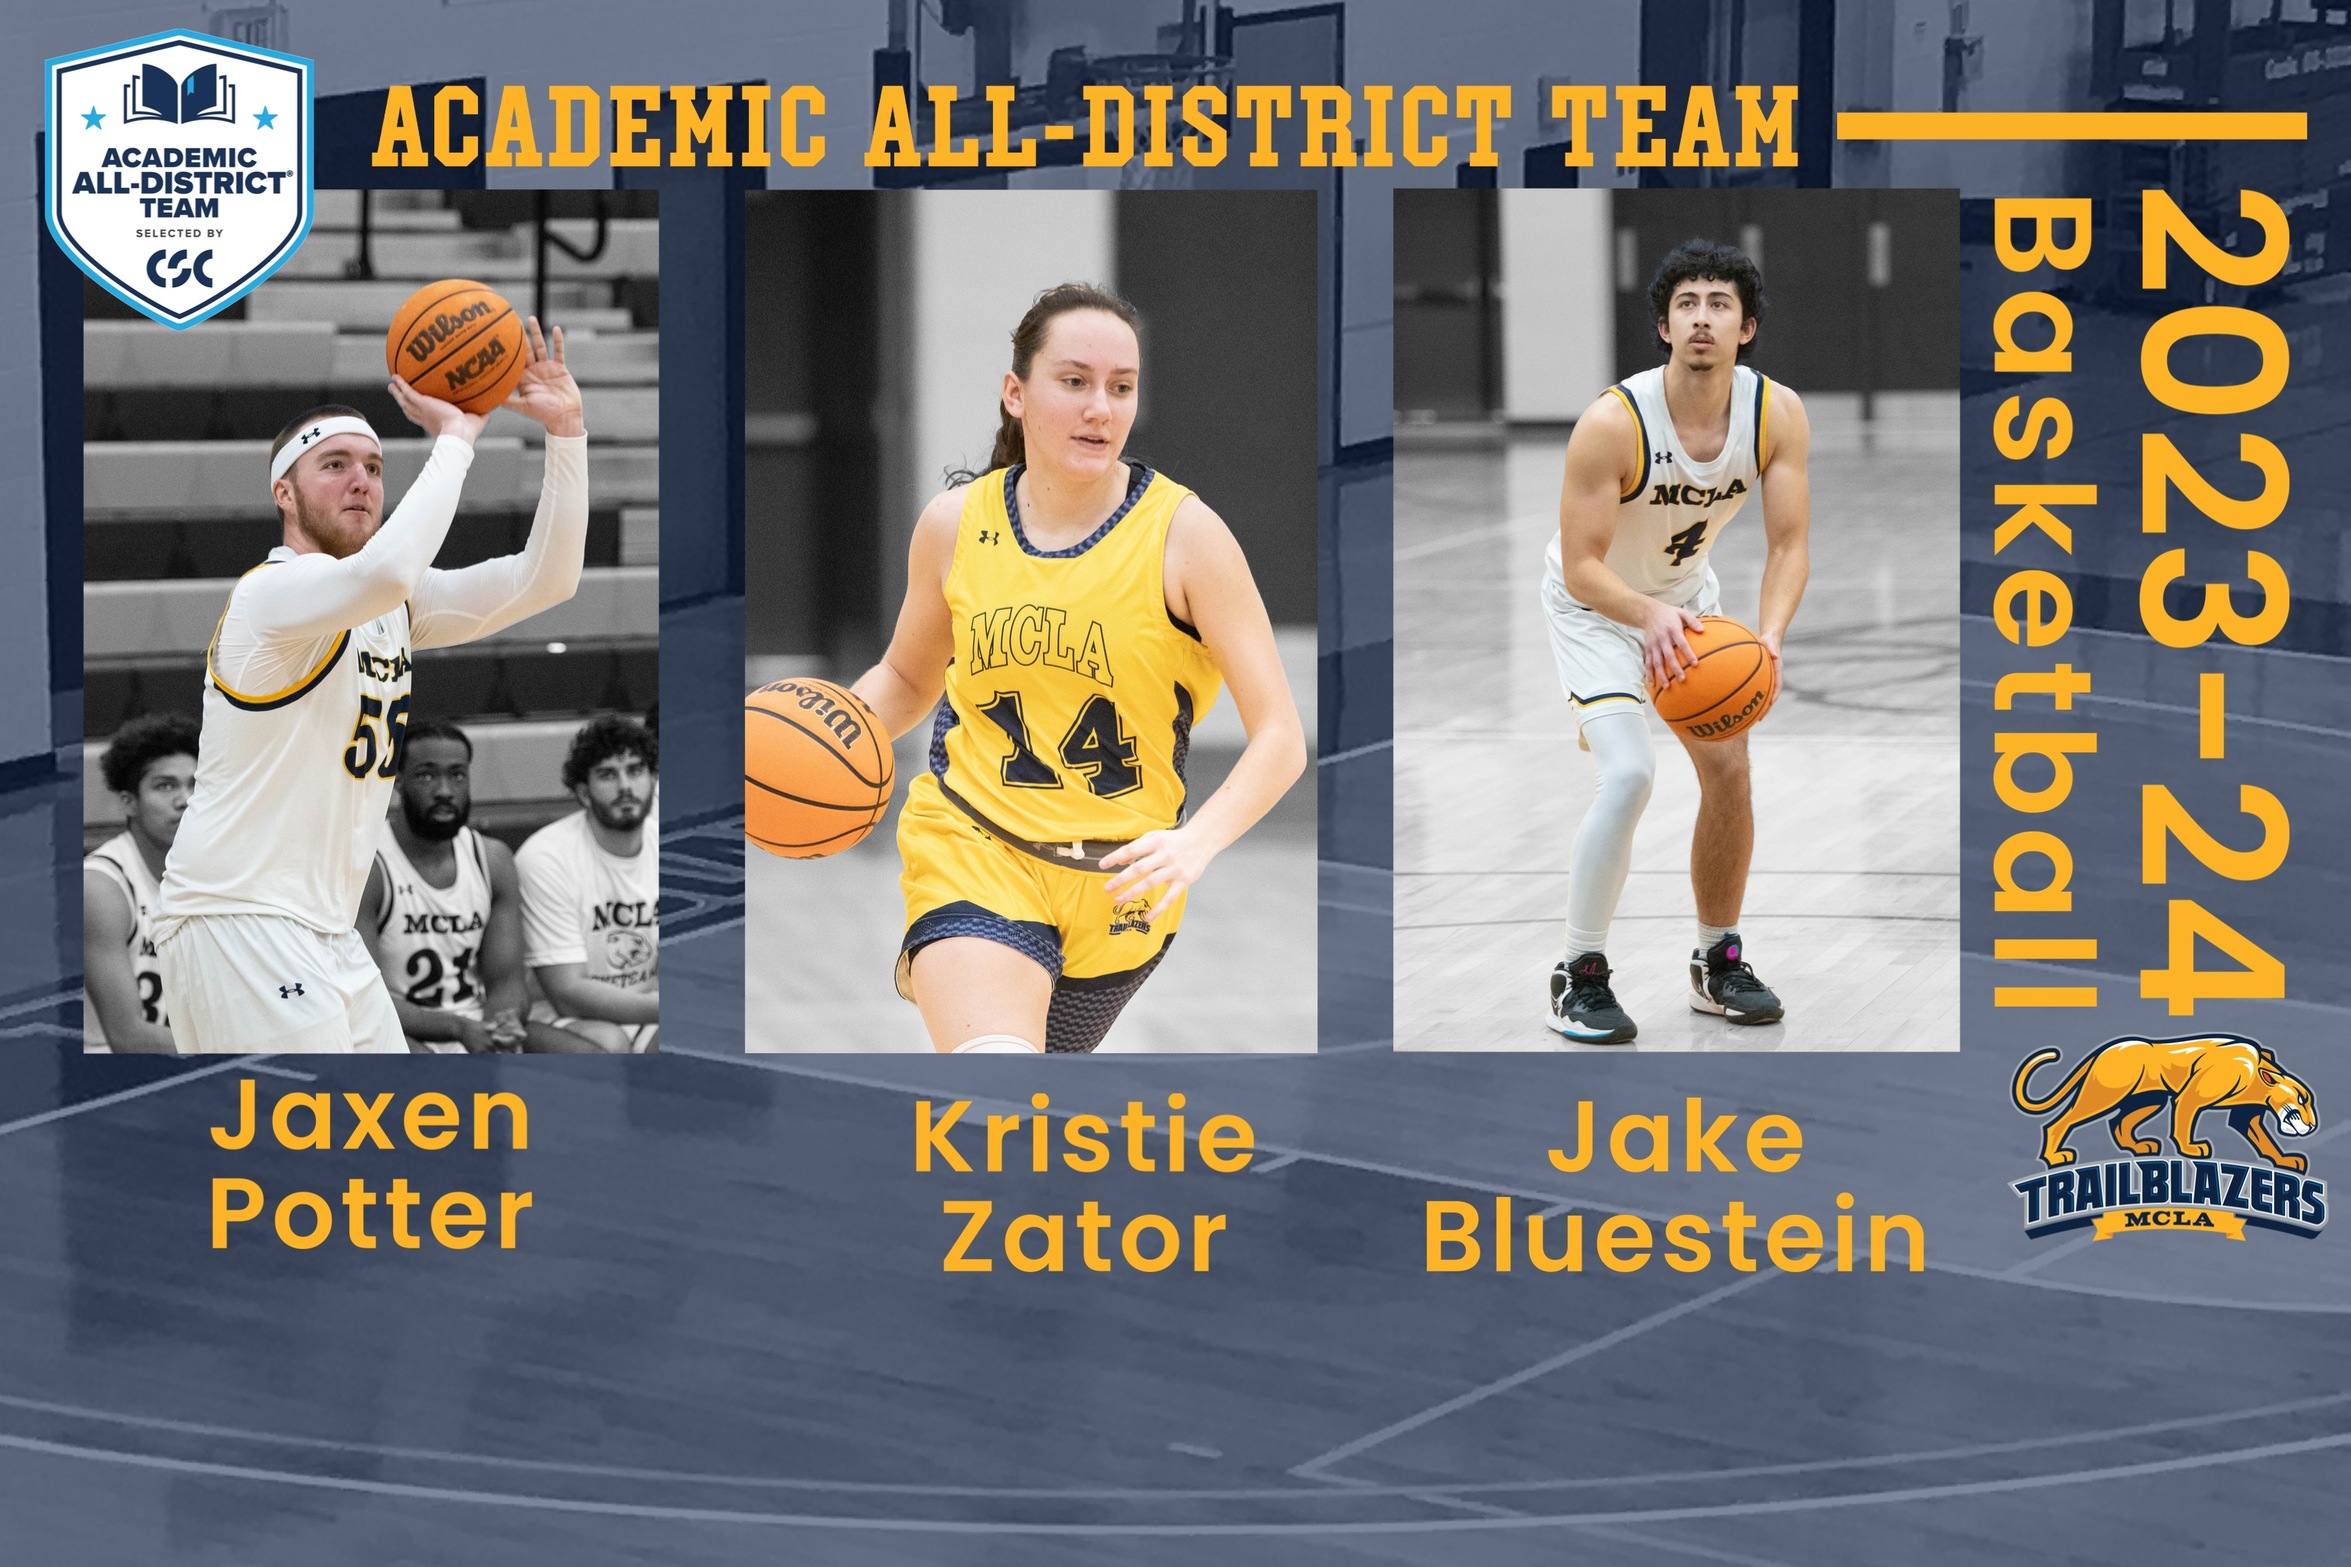 MCLA's Jake Bluestein, Jaxen Potter, and Kristie Zator earned CSC Academic All-District recognition.